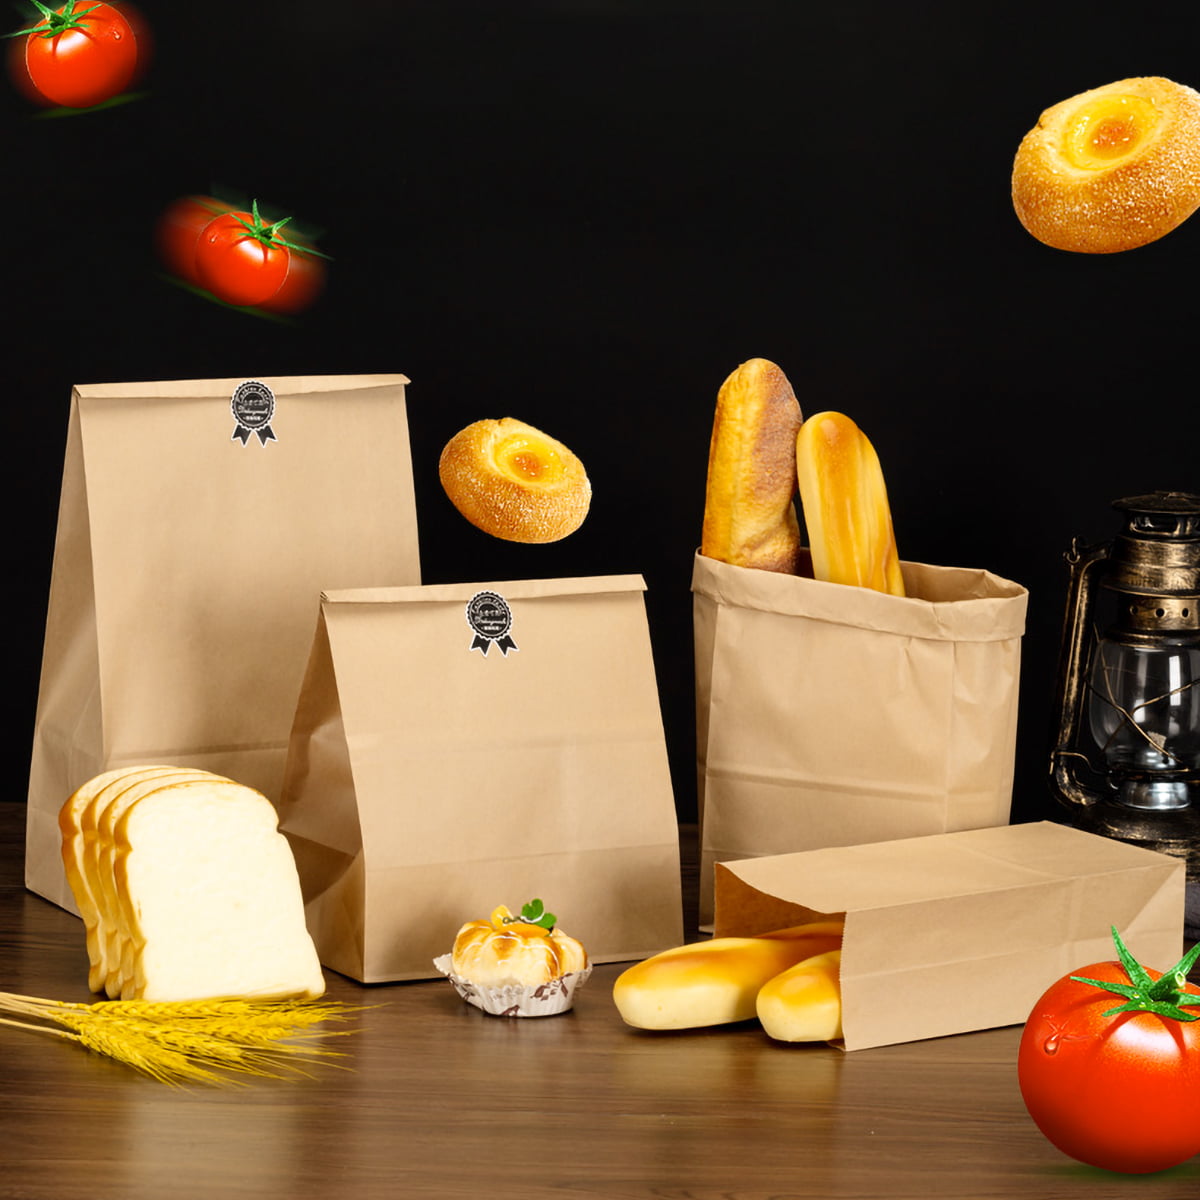 Kraft Paper Lunch Bags, 5 x 3-1/8 x 9-3/4 inch Paper Bread Bags Sandwich Bags Grocery Brown Bags Paper Snack Bags,Arts/School Bags Gift Party(50 Pack)